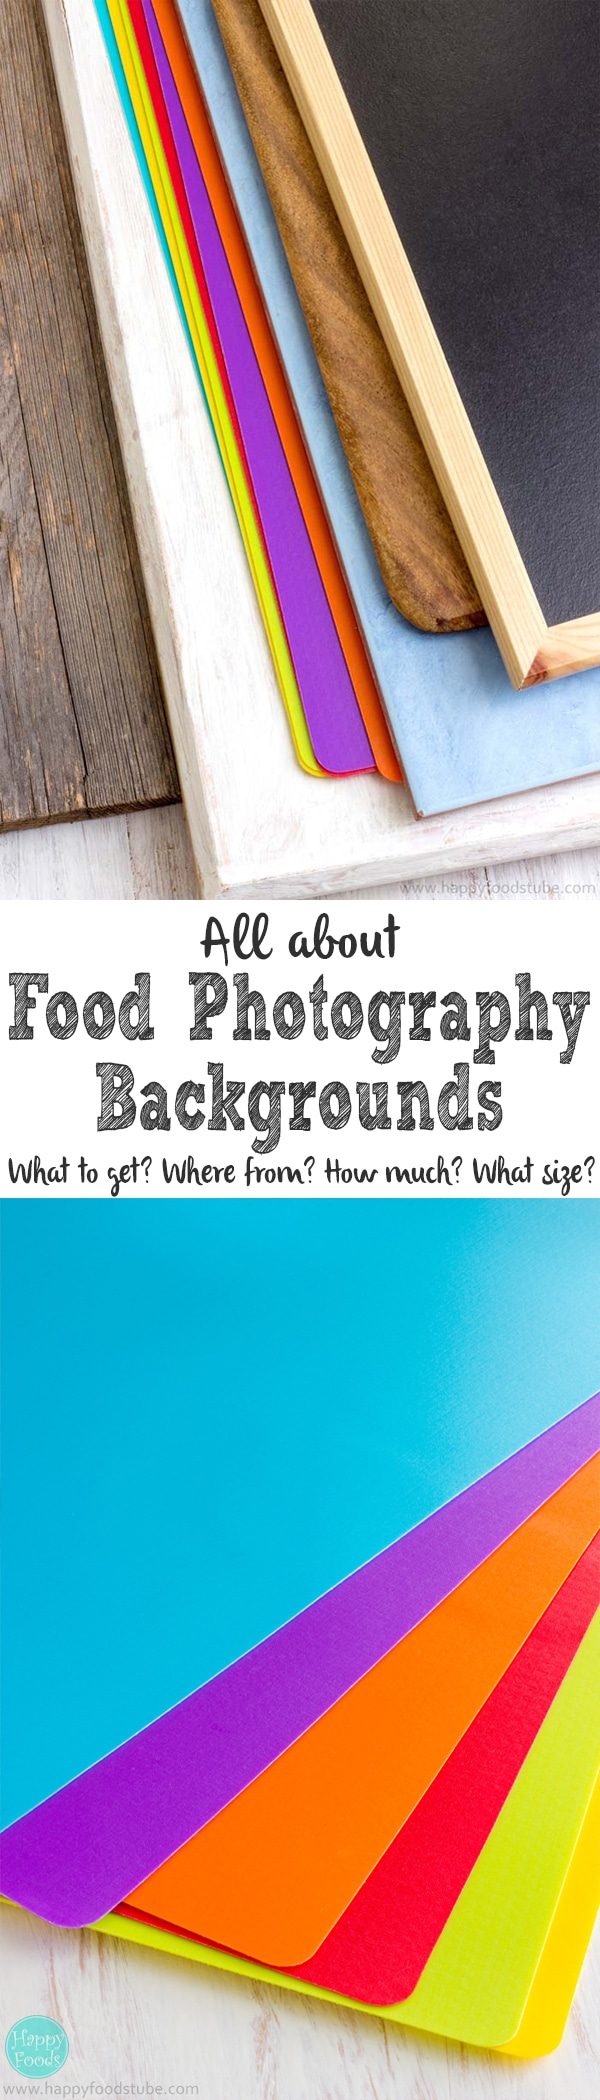 Everything you need to know about food affordable photography backgrounds. Food photgraphy tips! | happyfoodstube.com